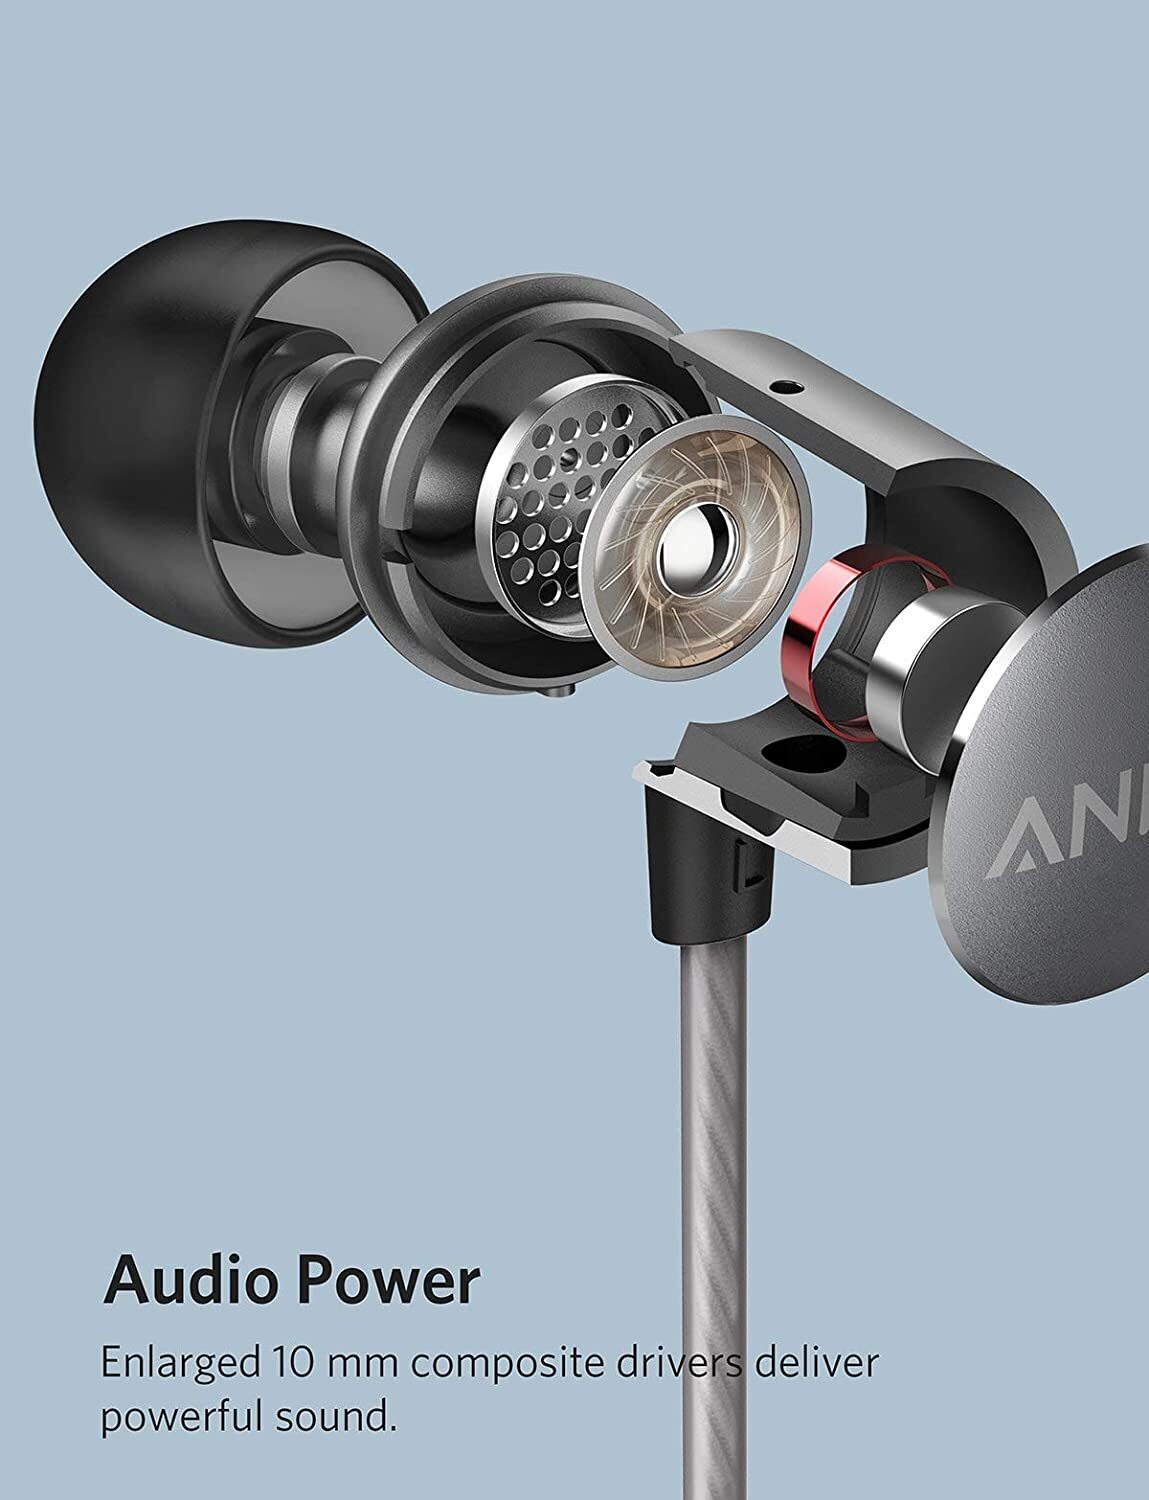 Anker Soundbuds Verve Built-in Microphone in Ear Stereo Wired Headphones (Black + Gray)-M000000000255 www.mysocially.com